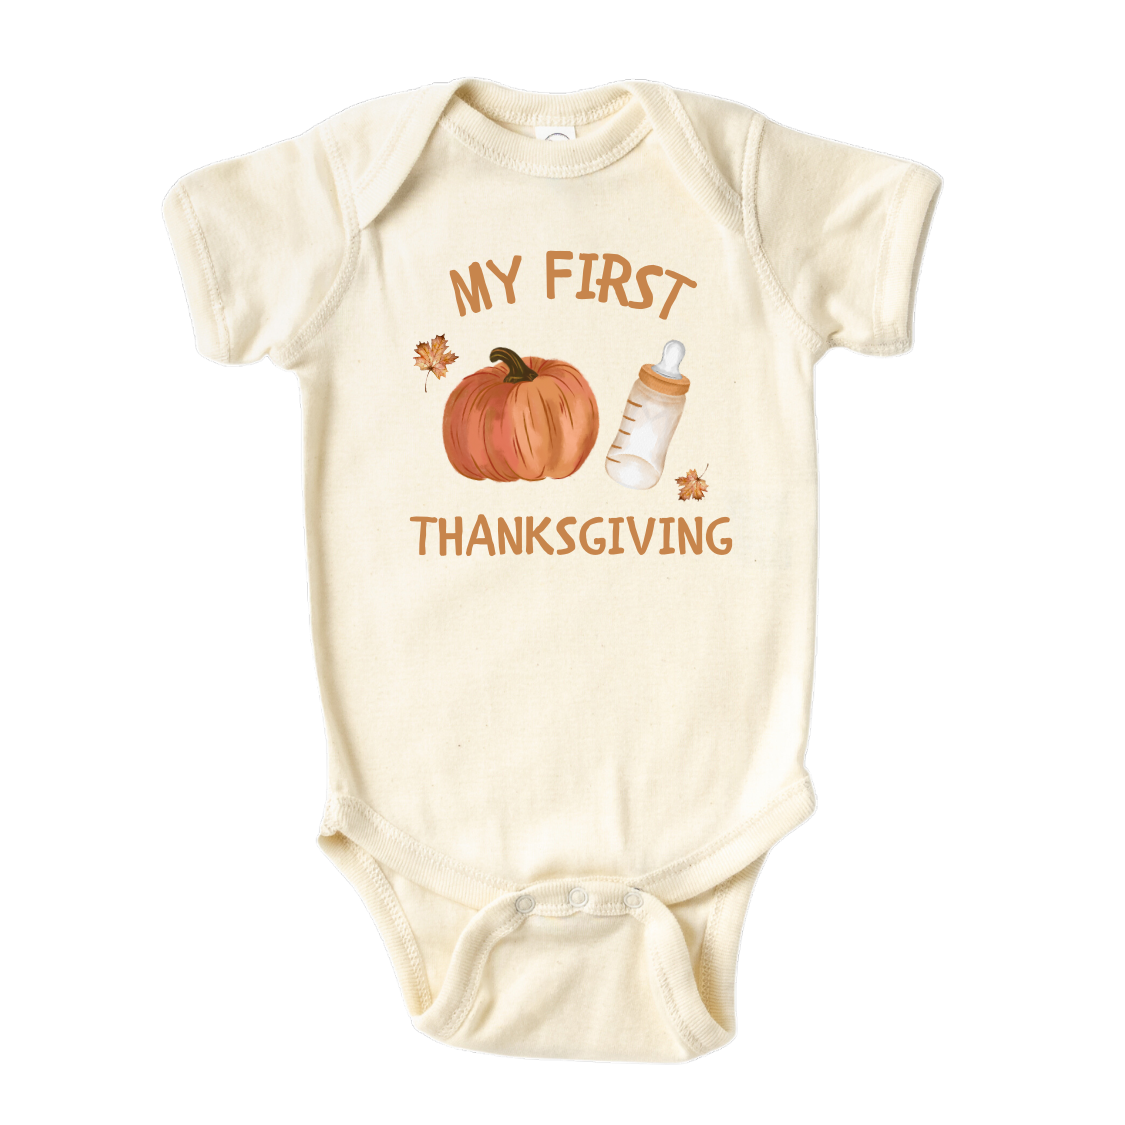 my first thanksgiving onesie for newborn gift for baby shower gift fall clothing fall baby outfit